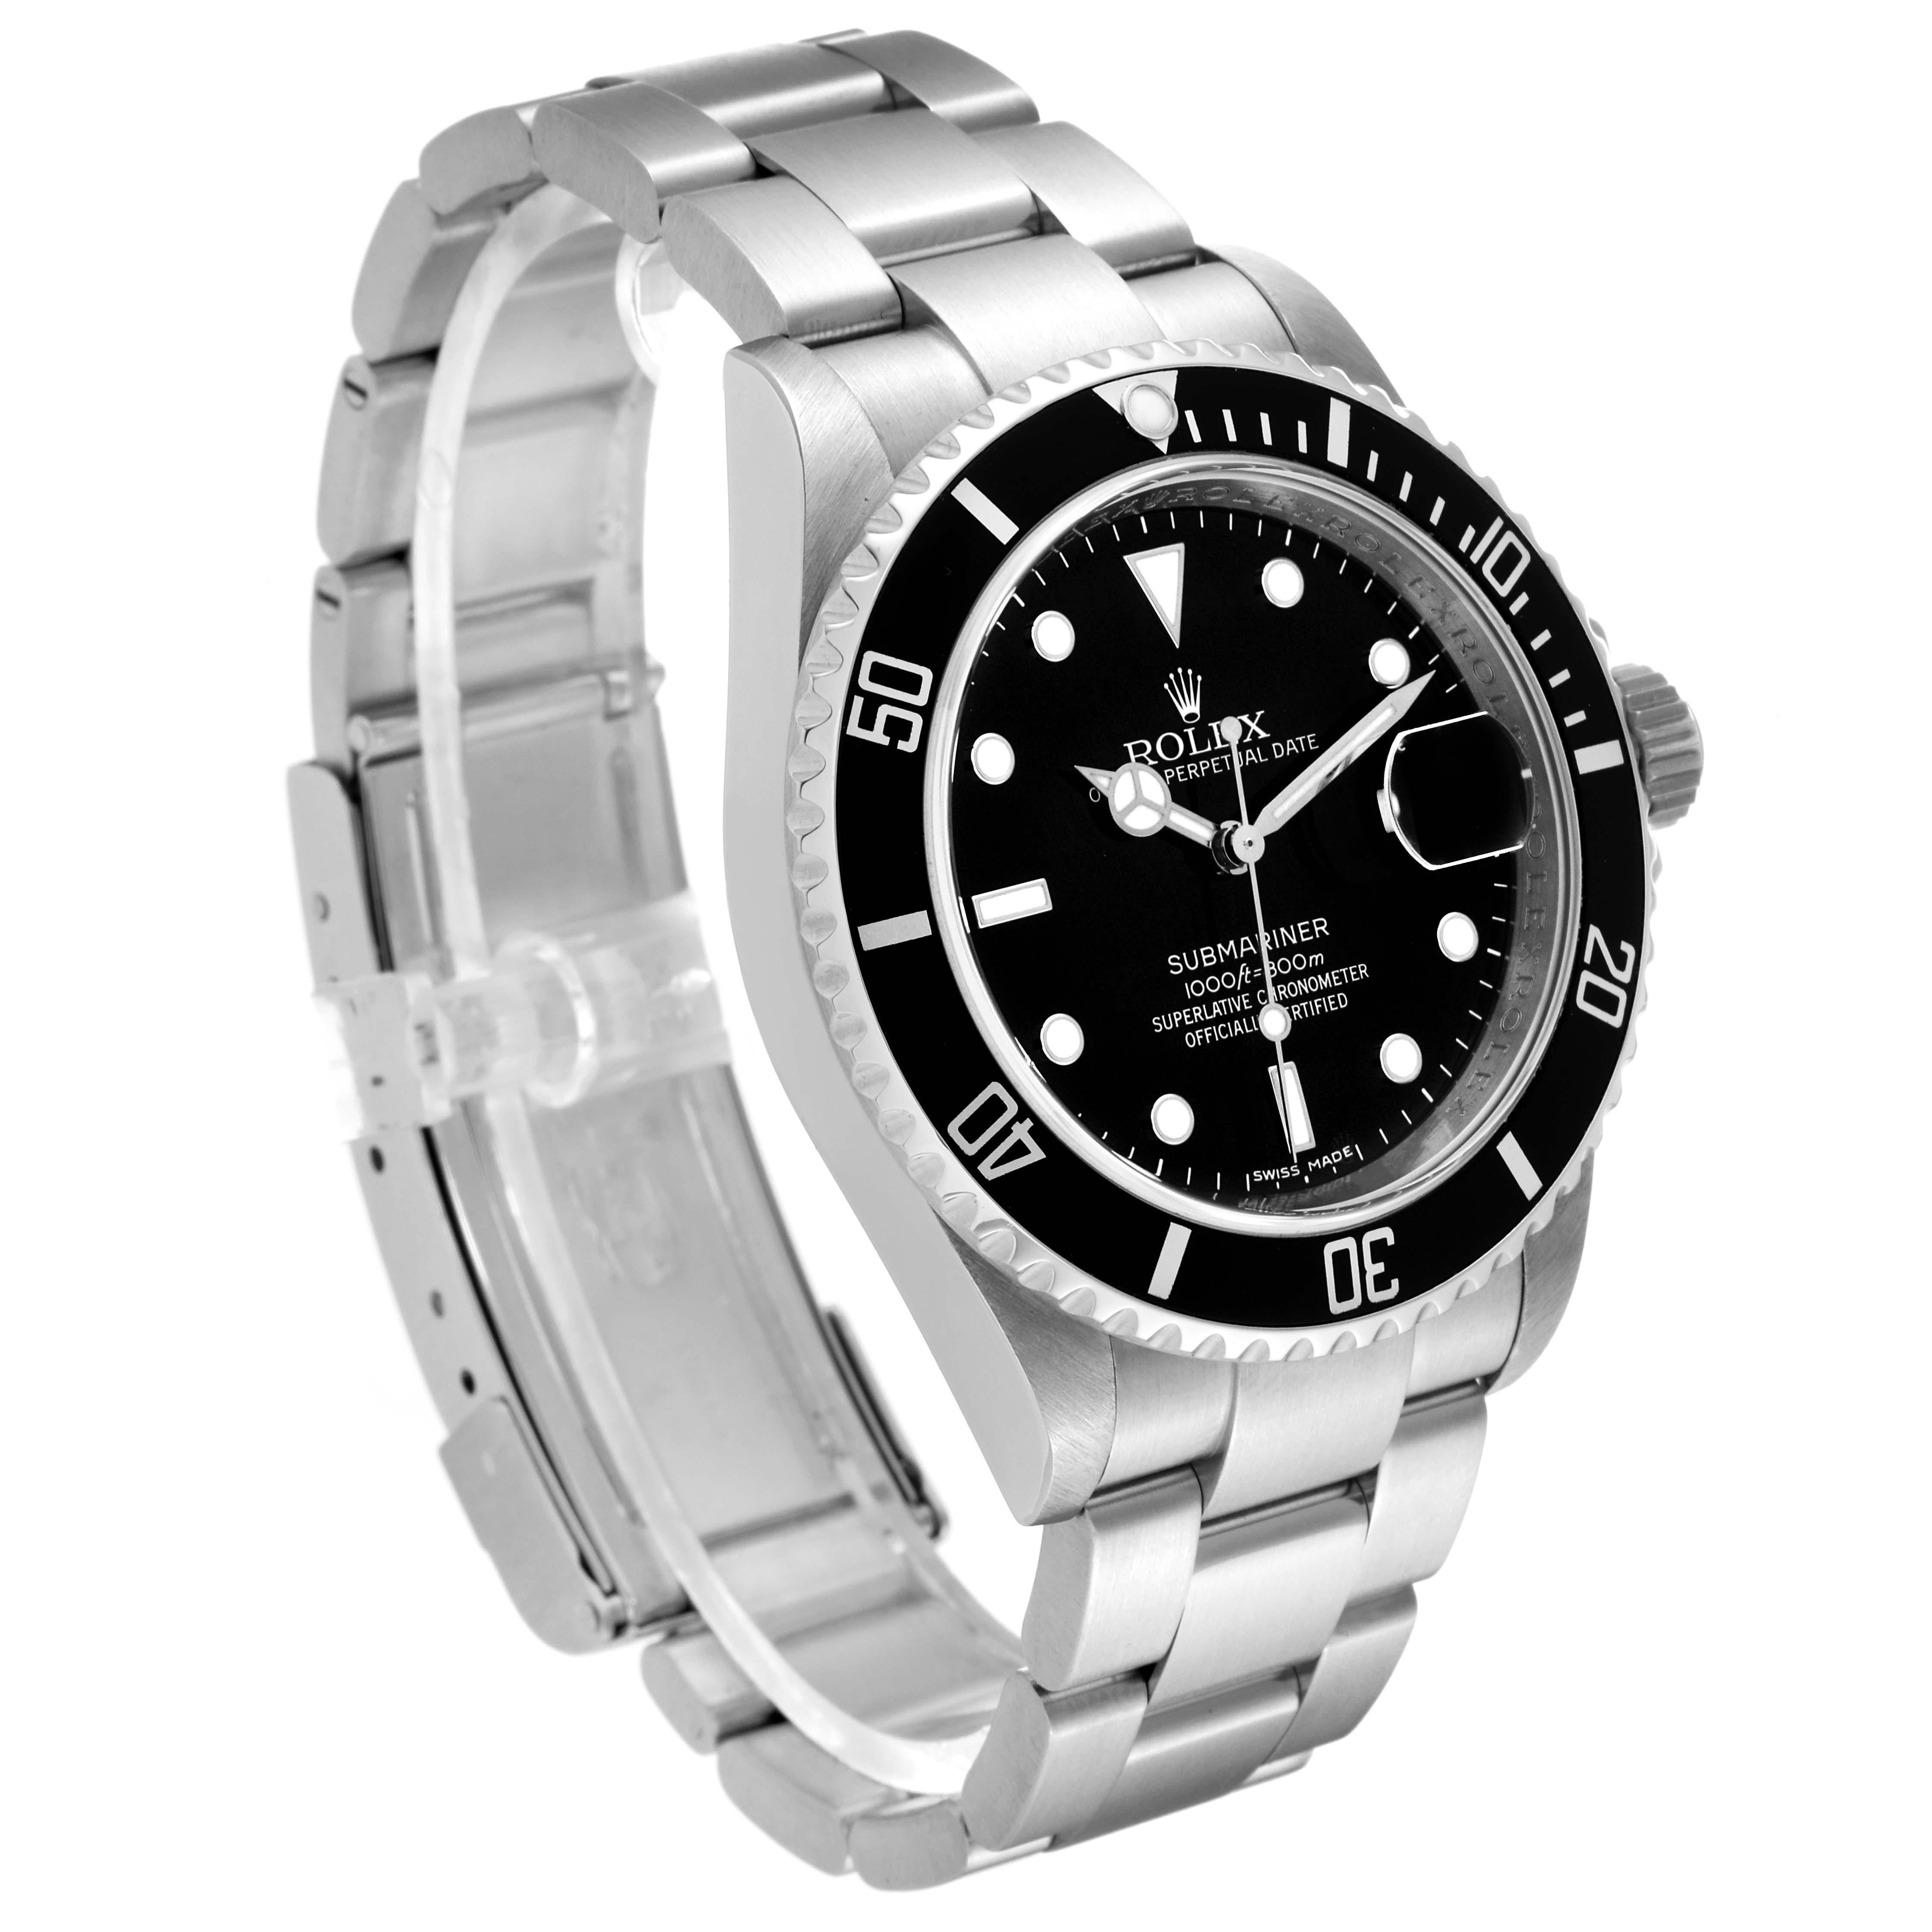 Men's Rolex Submariner Date Black Dial Steel Mens Watch 16610 Box Card For Sale